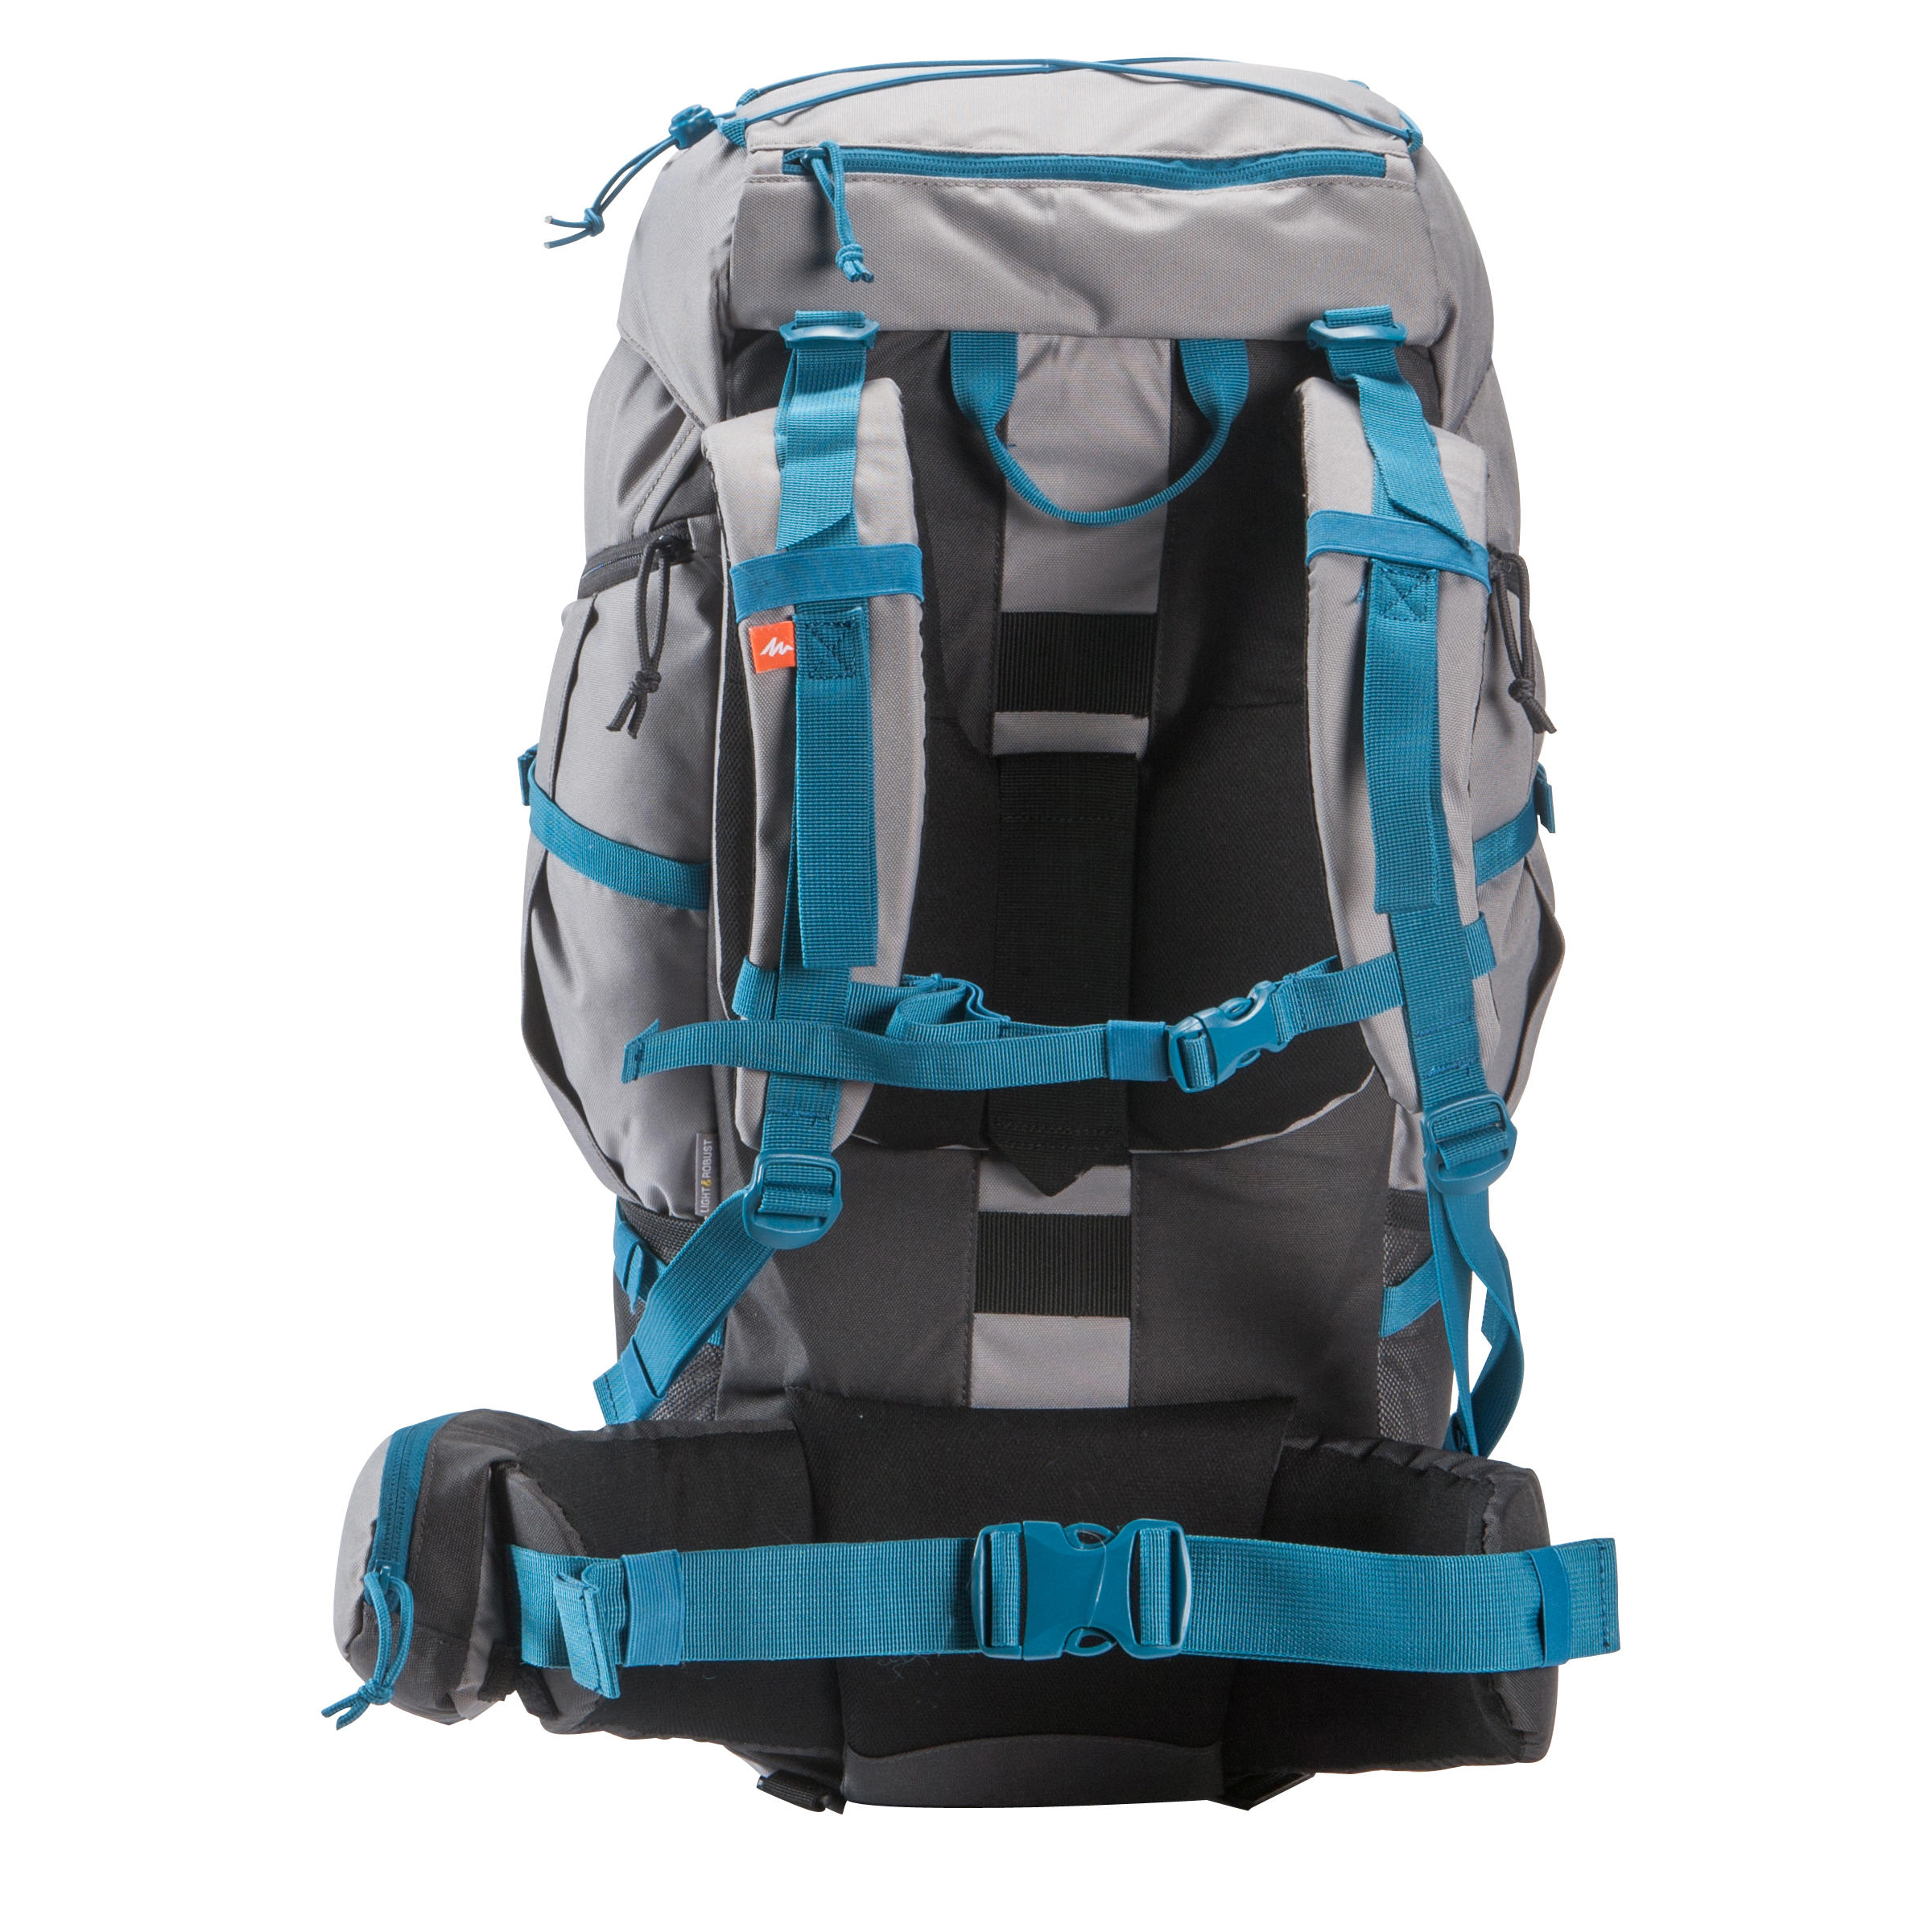 quechua forclaz 50 hiking backpack review